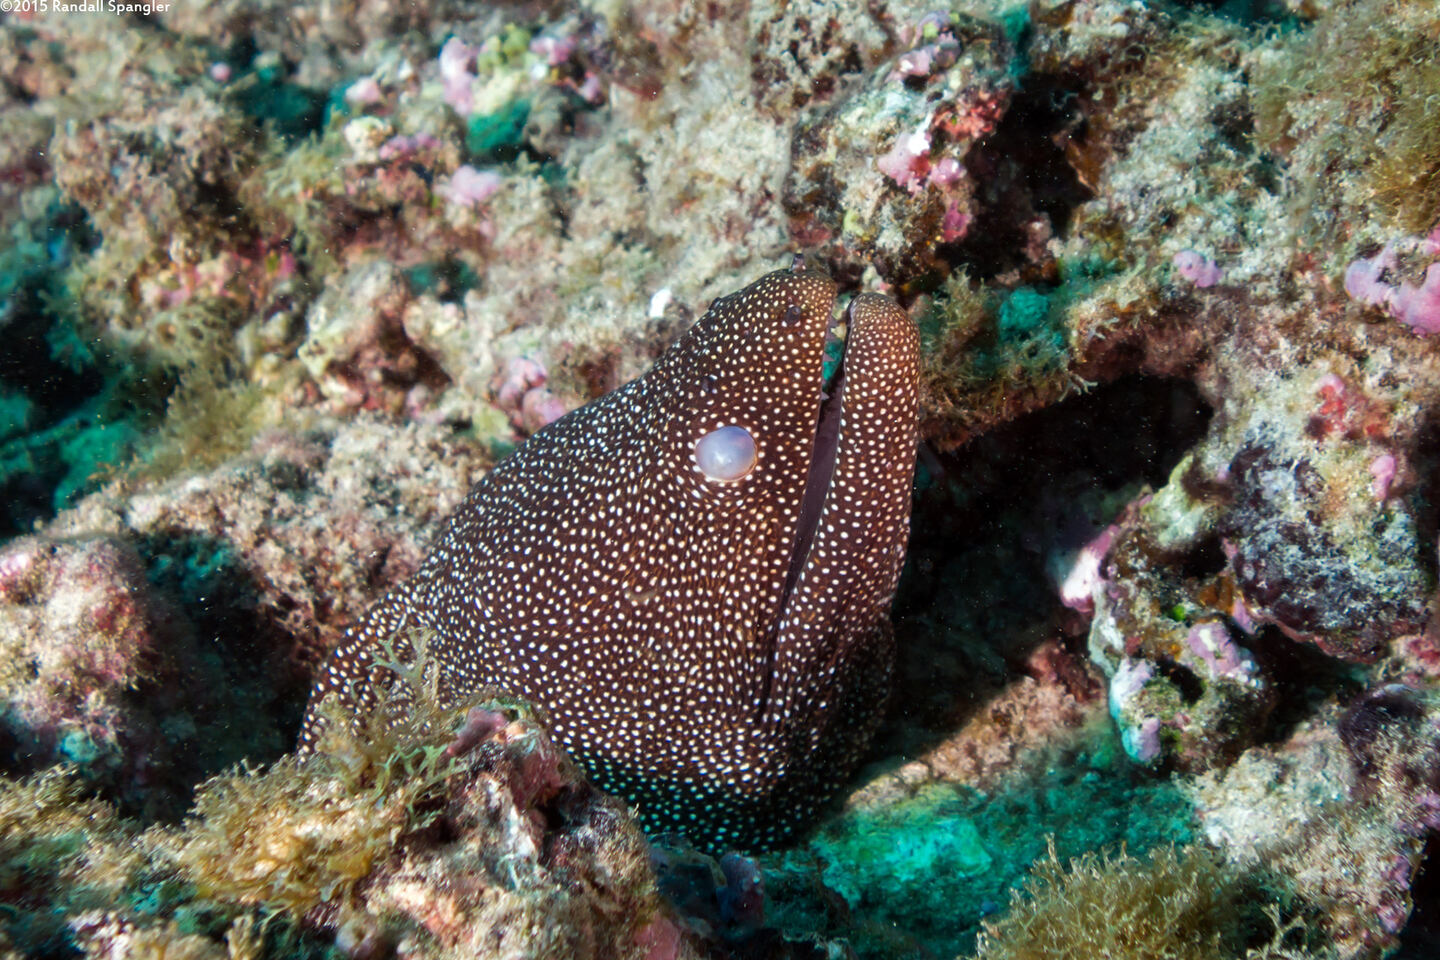 Gymnothorax meleagris (Whitemouth Moray); This one is blind in one eye